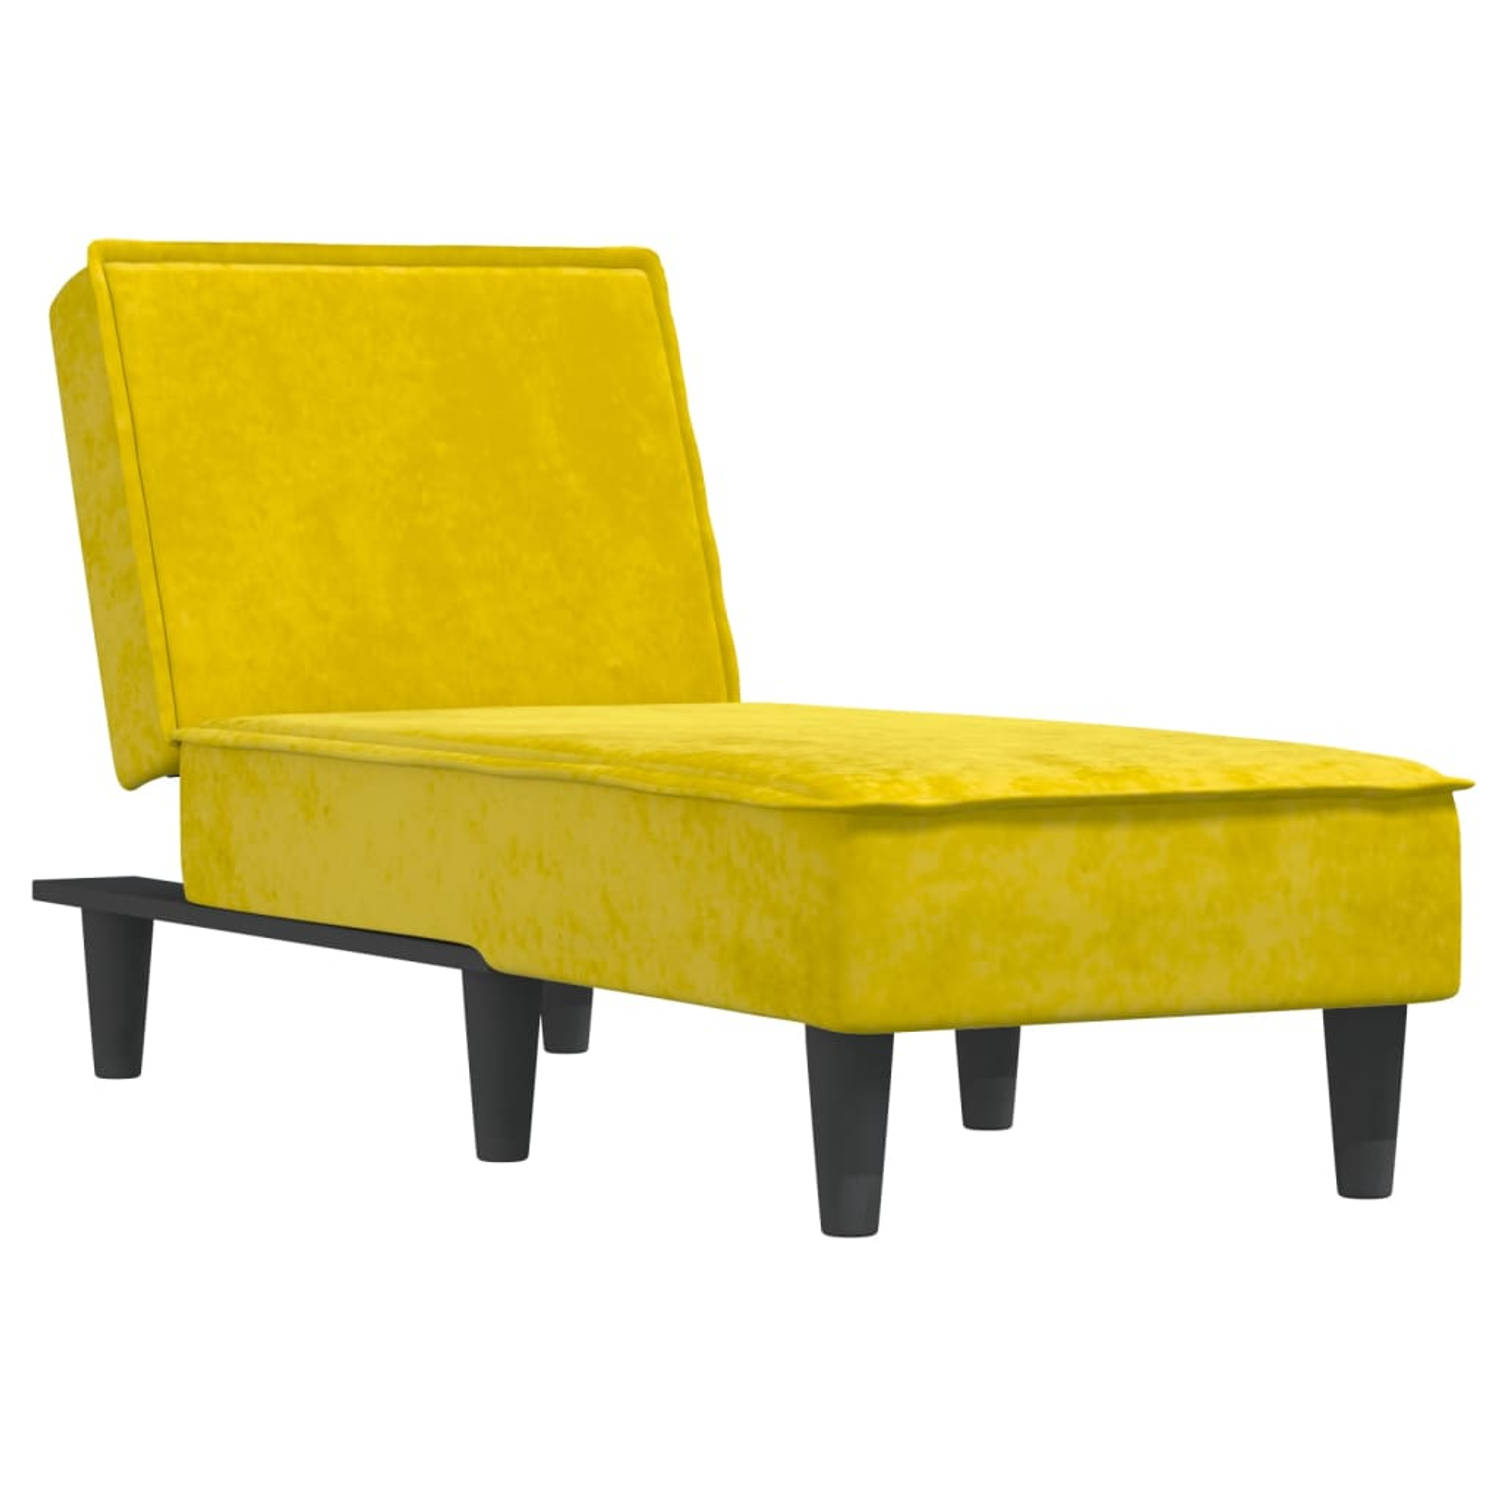 The Living Store Chaise longue fluweel geel - Chaise longue